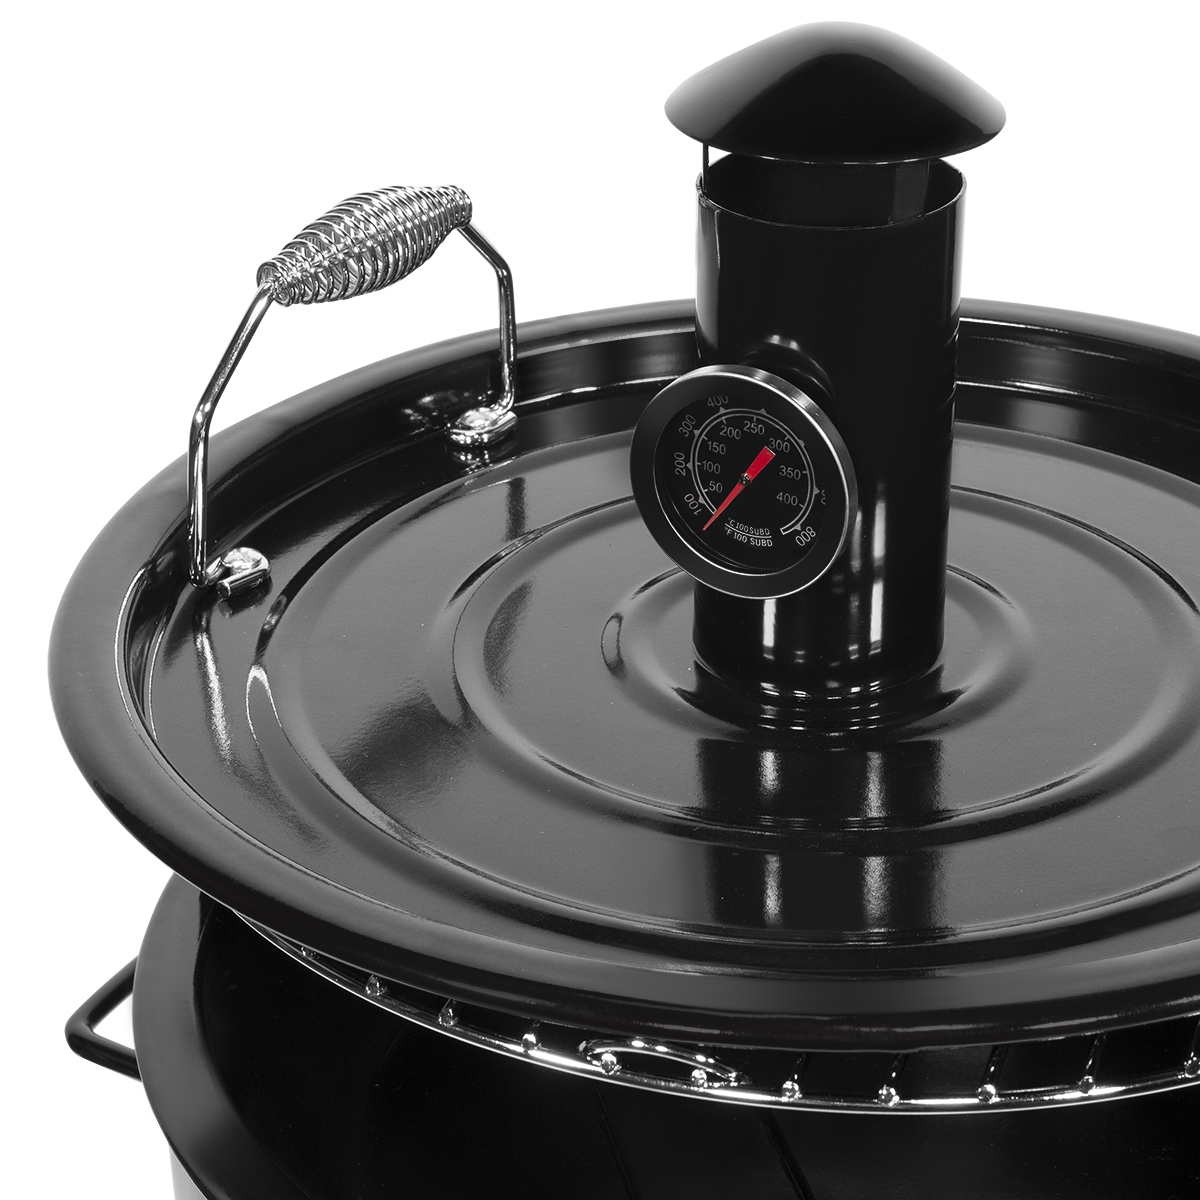 Barton Barrel Pit Charcoal Barbecue Smoker Grill BBQ, Pizza Oven, Table & Fire Pit Grilling -Black - image 4 of 7